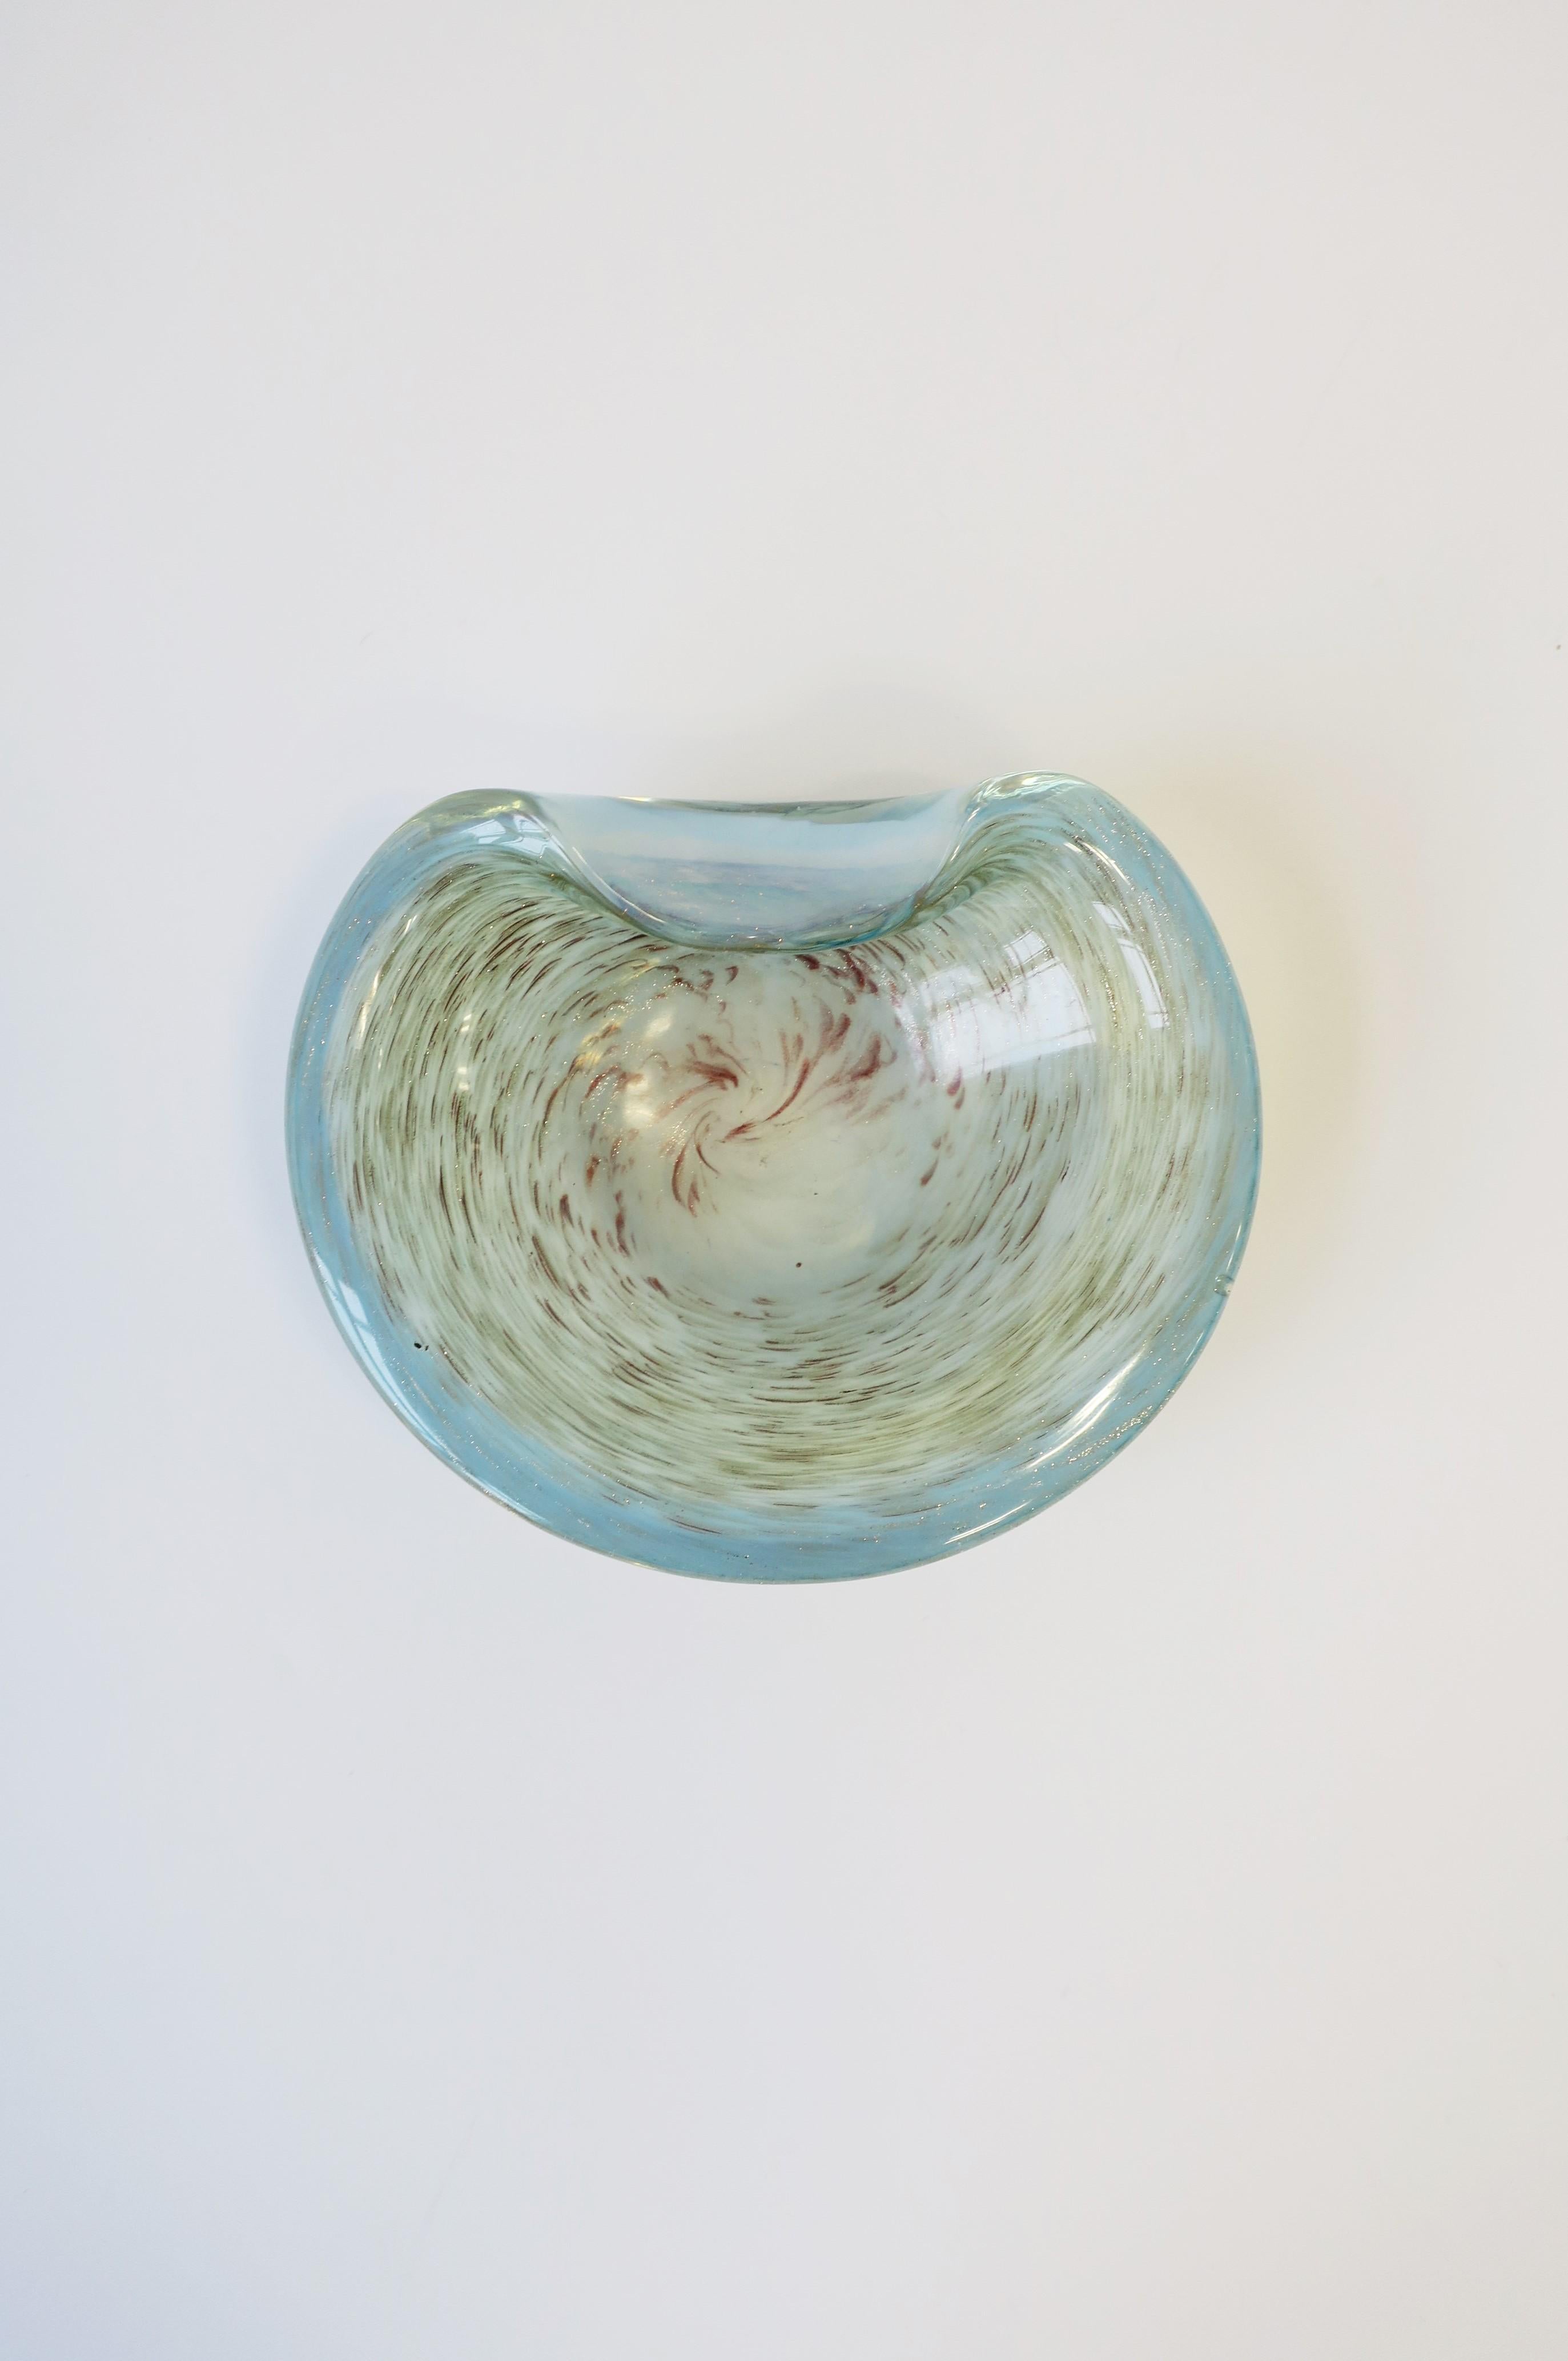 A beautiful Italian Murano shimmering light blue/ice blue art glass bowl with swirls of copper and gold, midcentury modern period, circa 1960s, Italy. Dimensions: 5